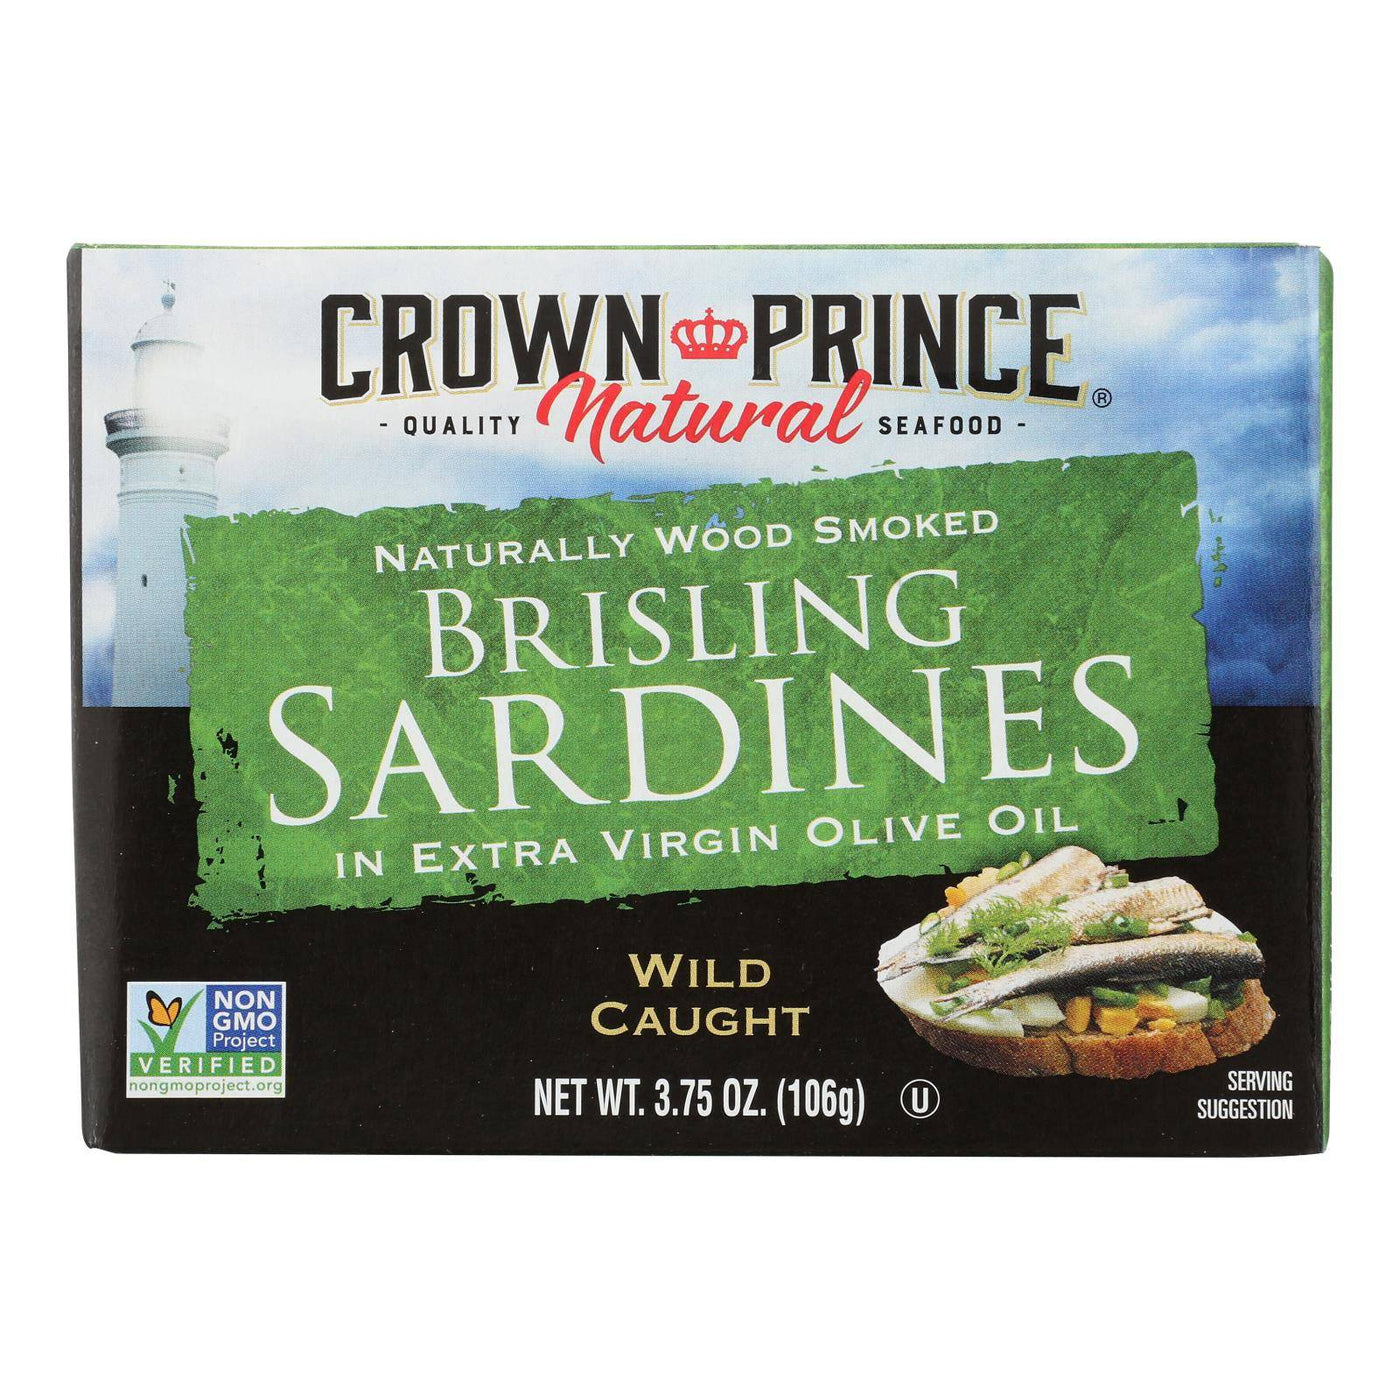 Buy Crown Prince Brisling Sardines In Extra Virgin Olive Oil - Case Of 12 - 3.75 Oz.  at OnlyNaturals.us